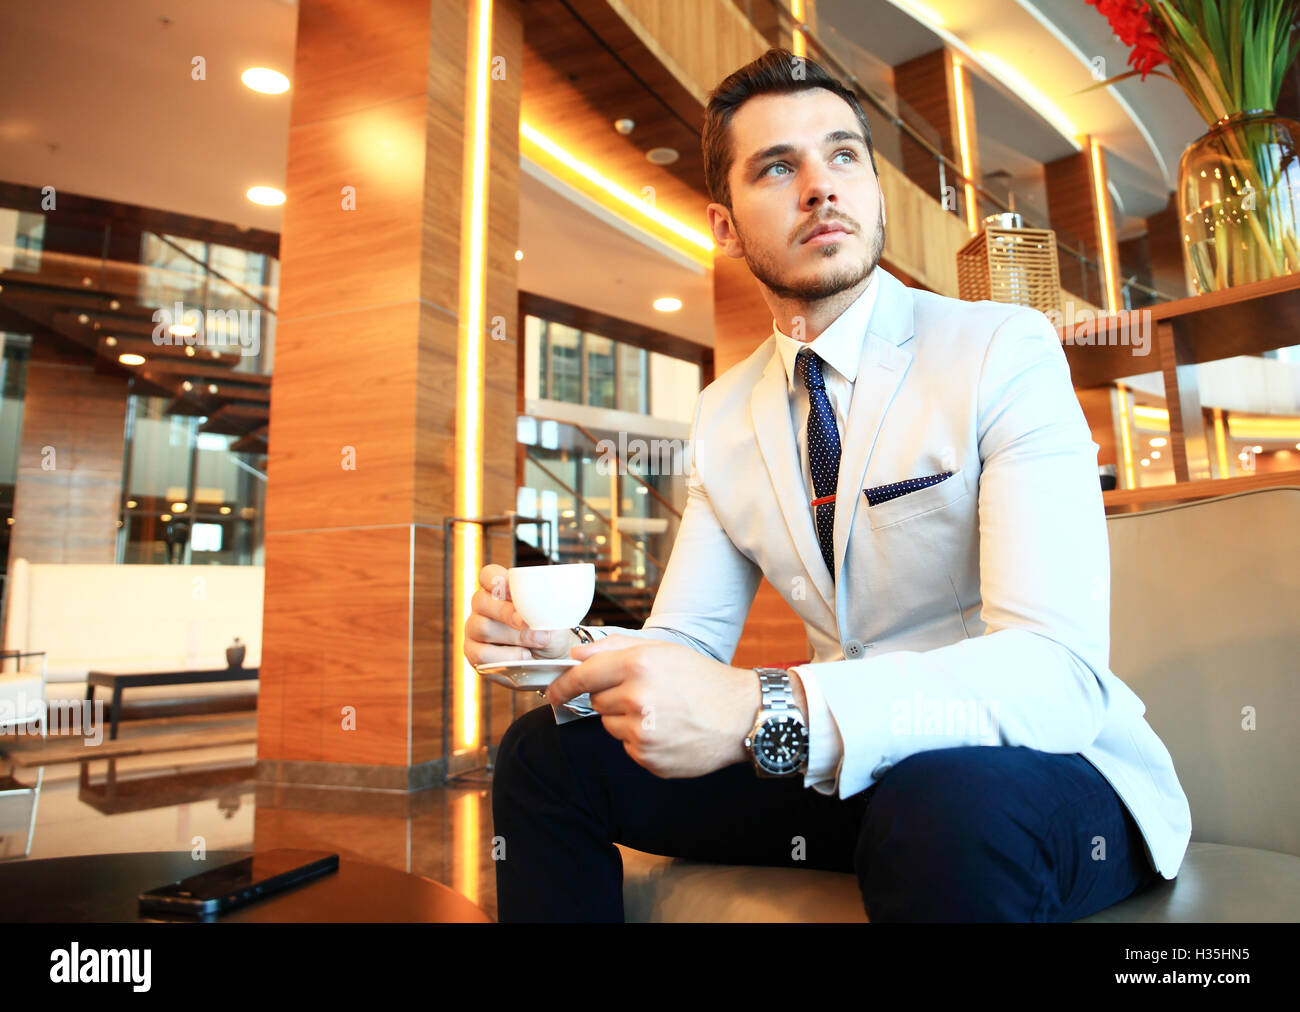 Portrait of handsome successful man drink coffee sitting in coffee shop, business man having breakfast at hotel lobby. Stock Photo